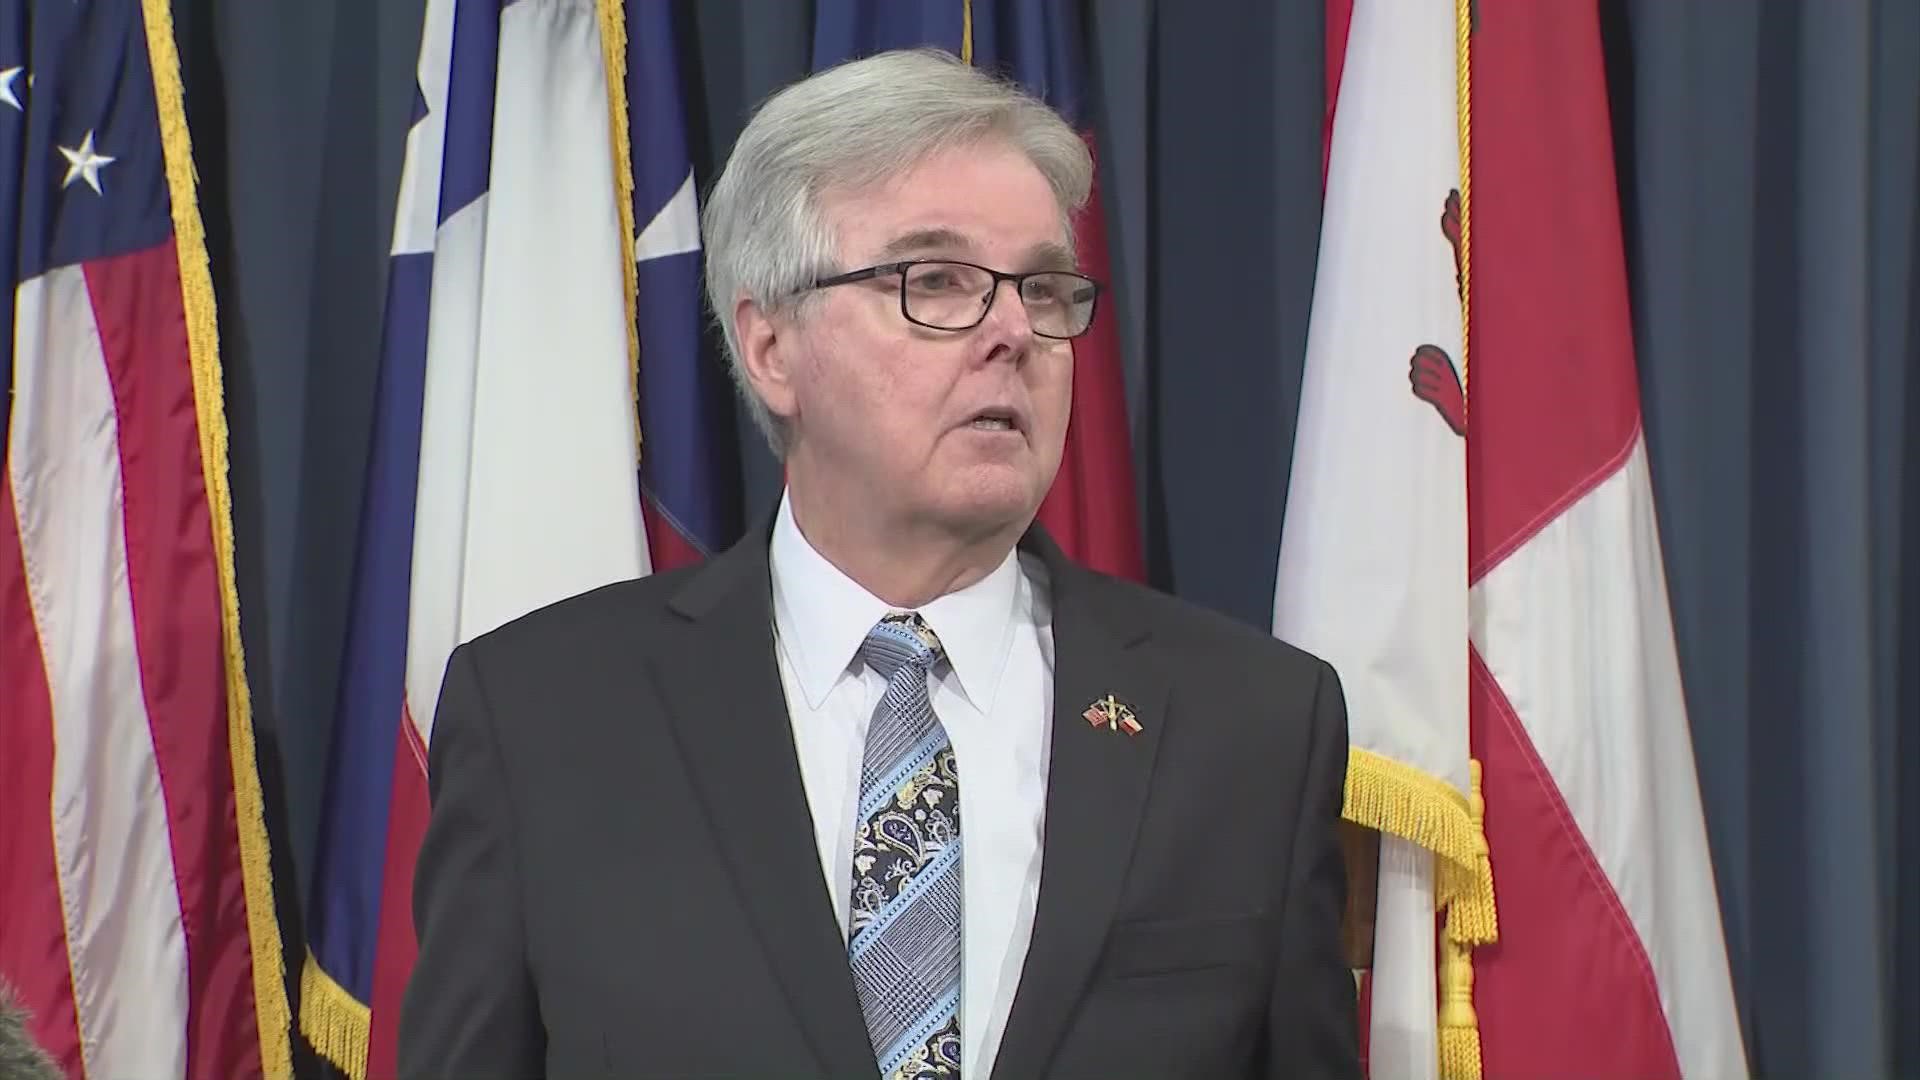 Patrick said lawmakers have an “extraordinary opportunity” to shape the future of Texas at the start of the next legislative session, which begins Jan. 10.